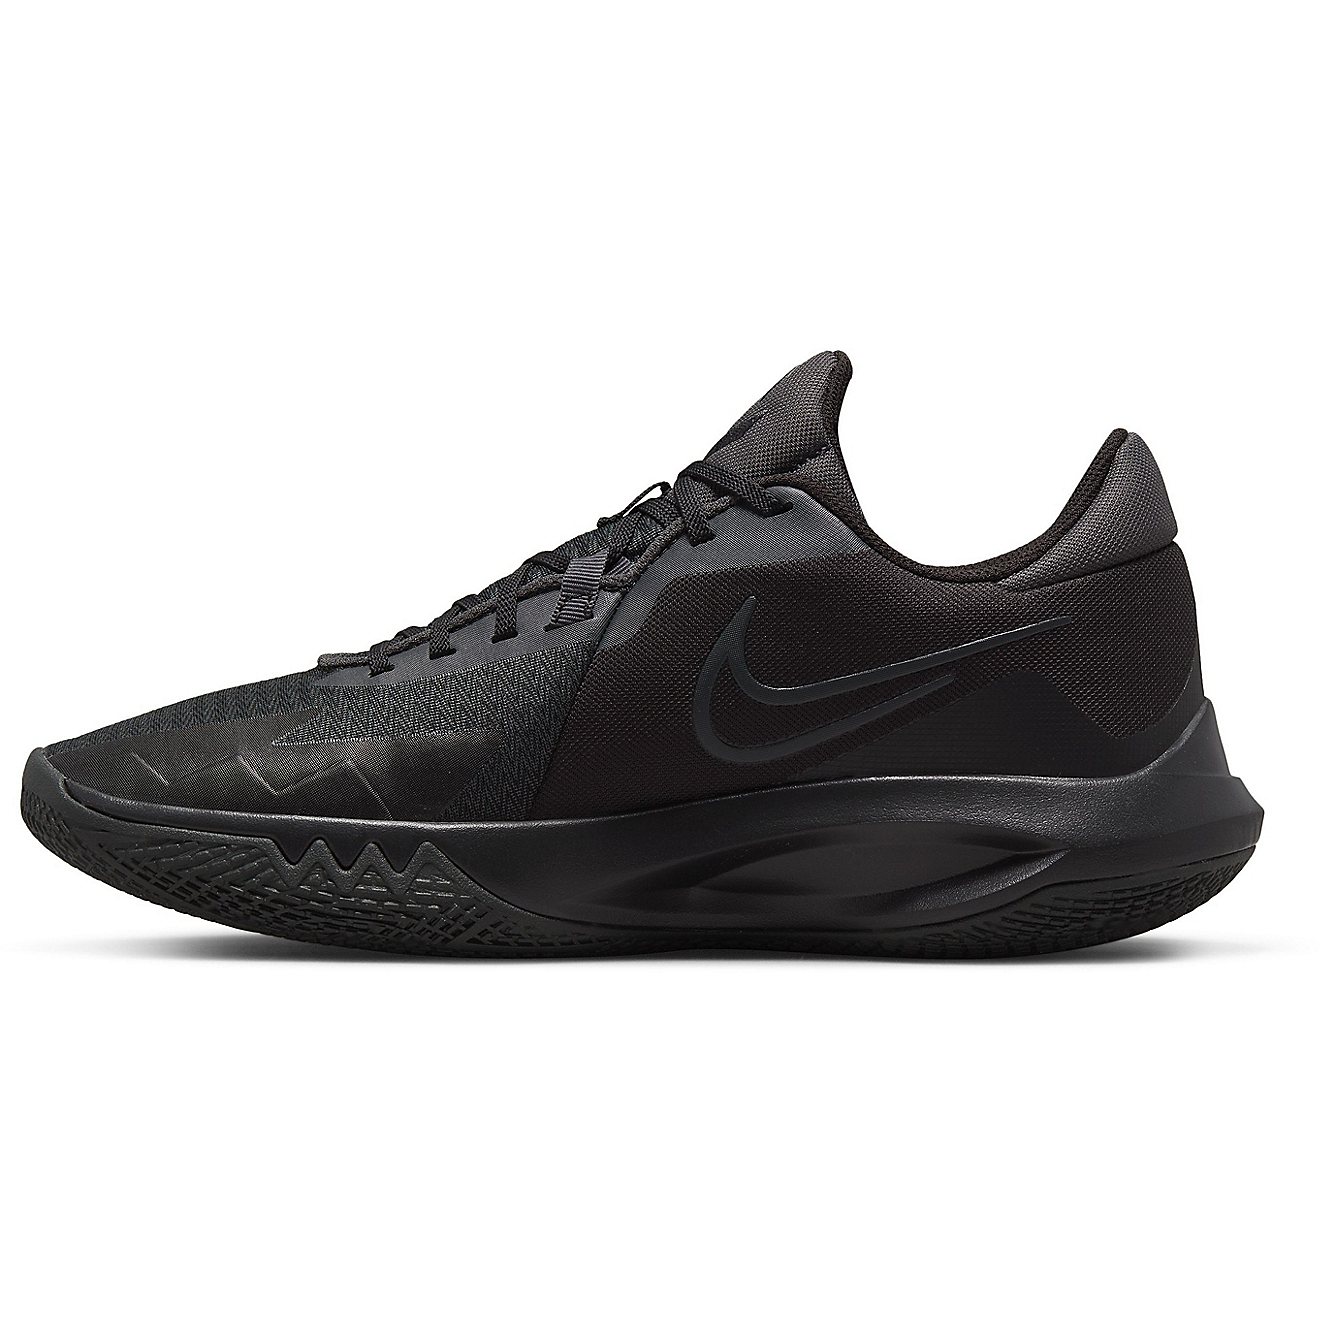 Nike Men's Precision 6 Basketball Shoes                                                                                          - view number 2